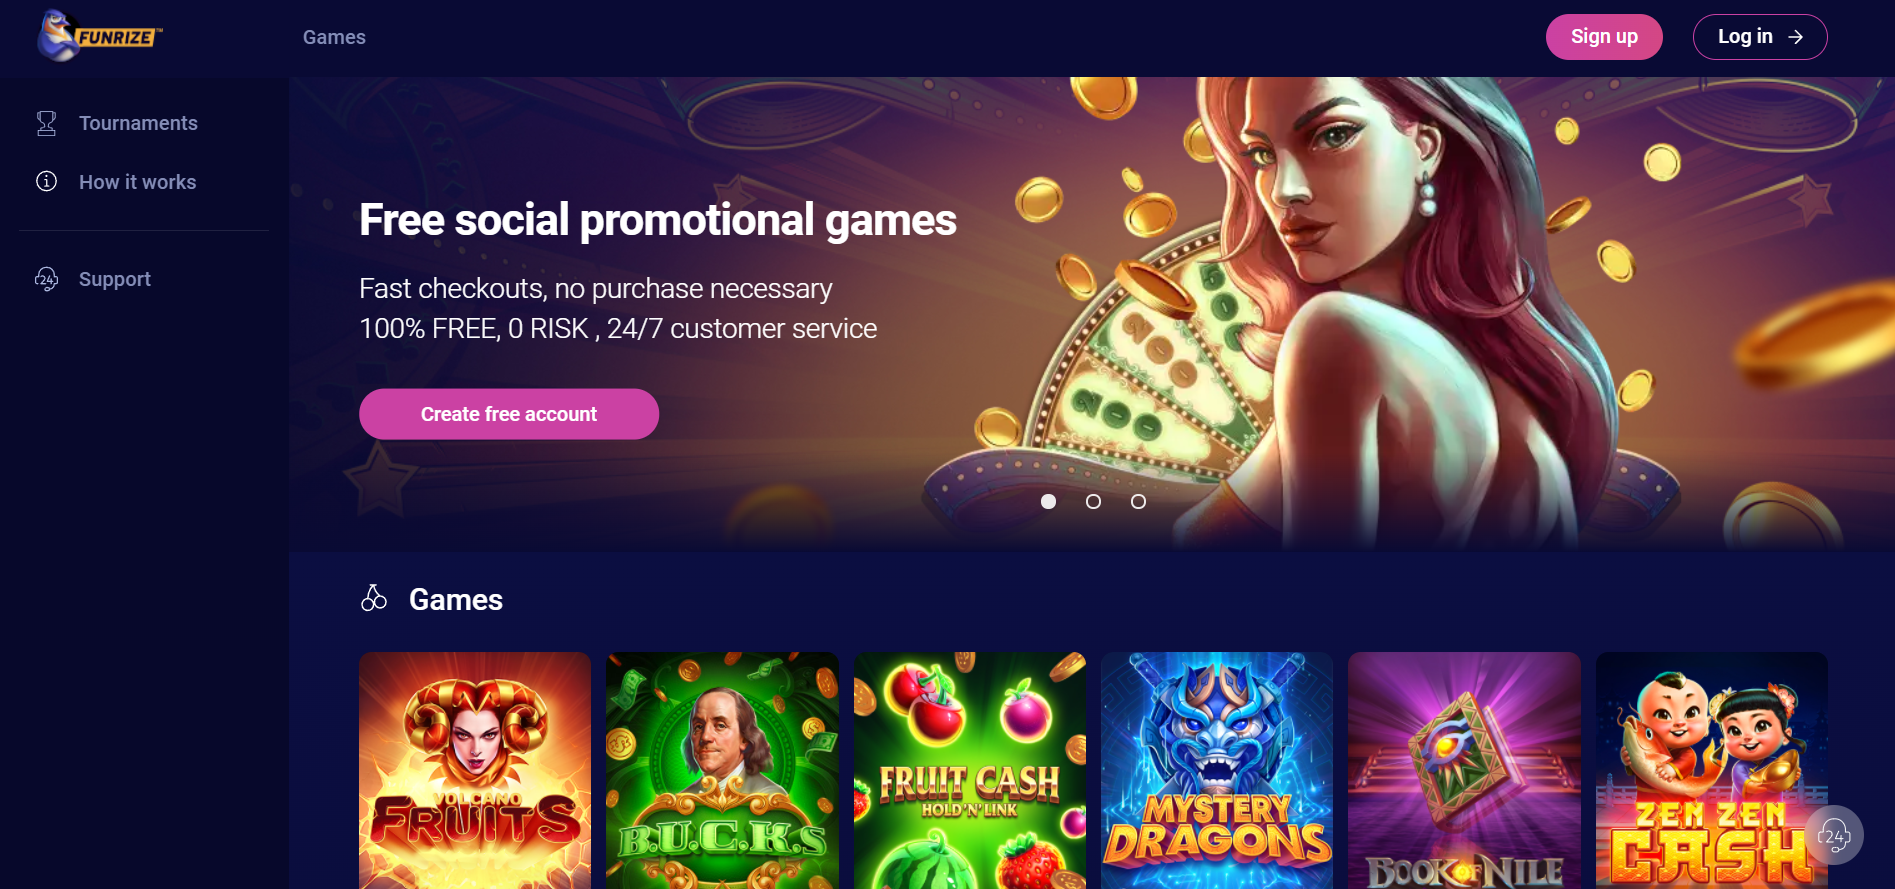 OMG! The Best free bet online casino Ever!